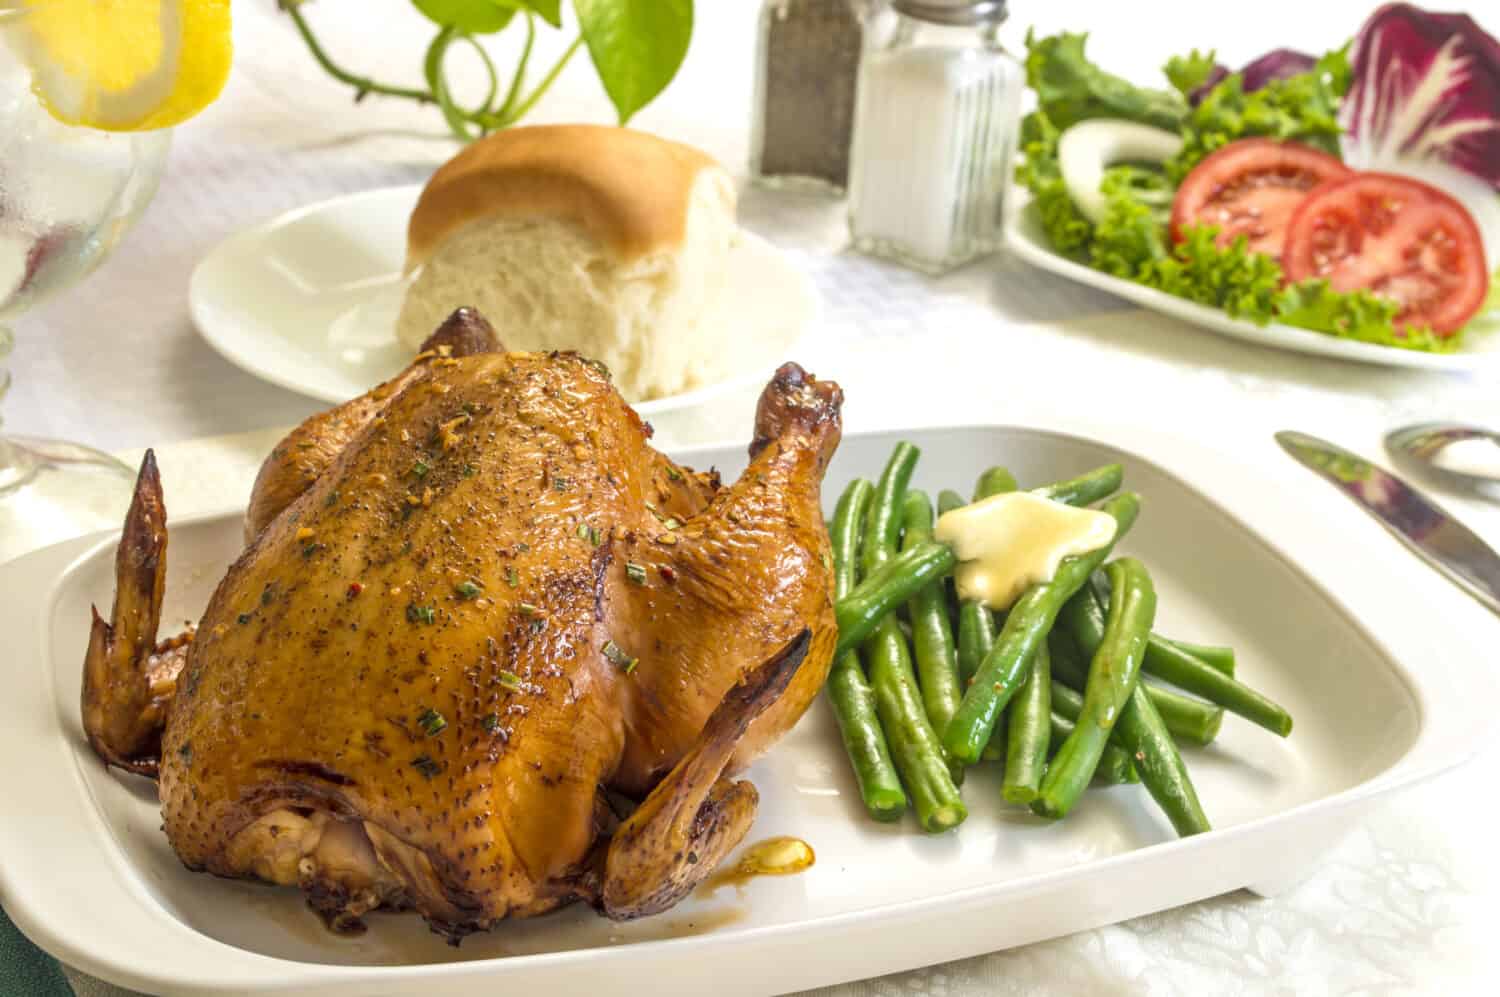 Cornish game hen with fresh vegetables and roll ready to enjoy for dinner or lunch "Cornish hen meal"